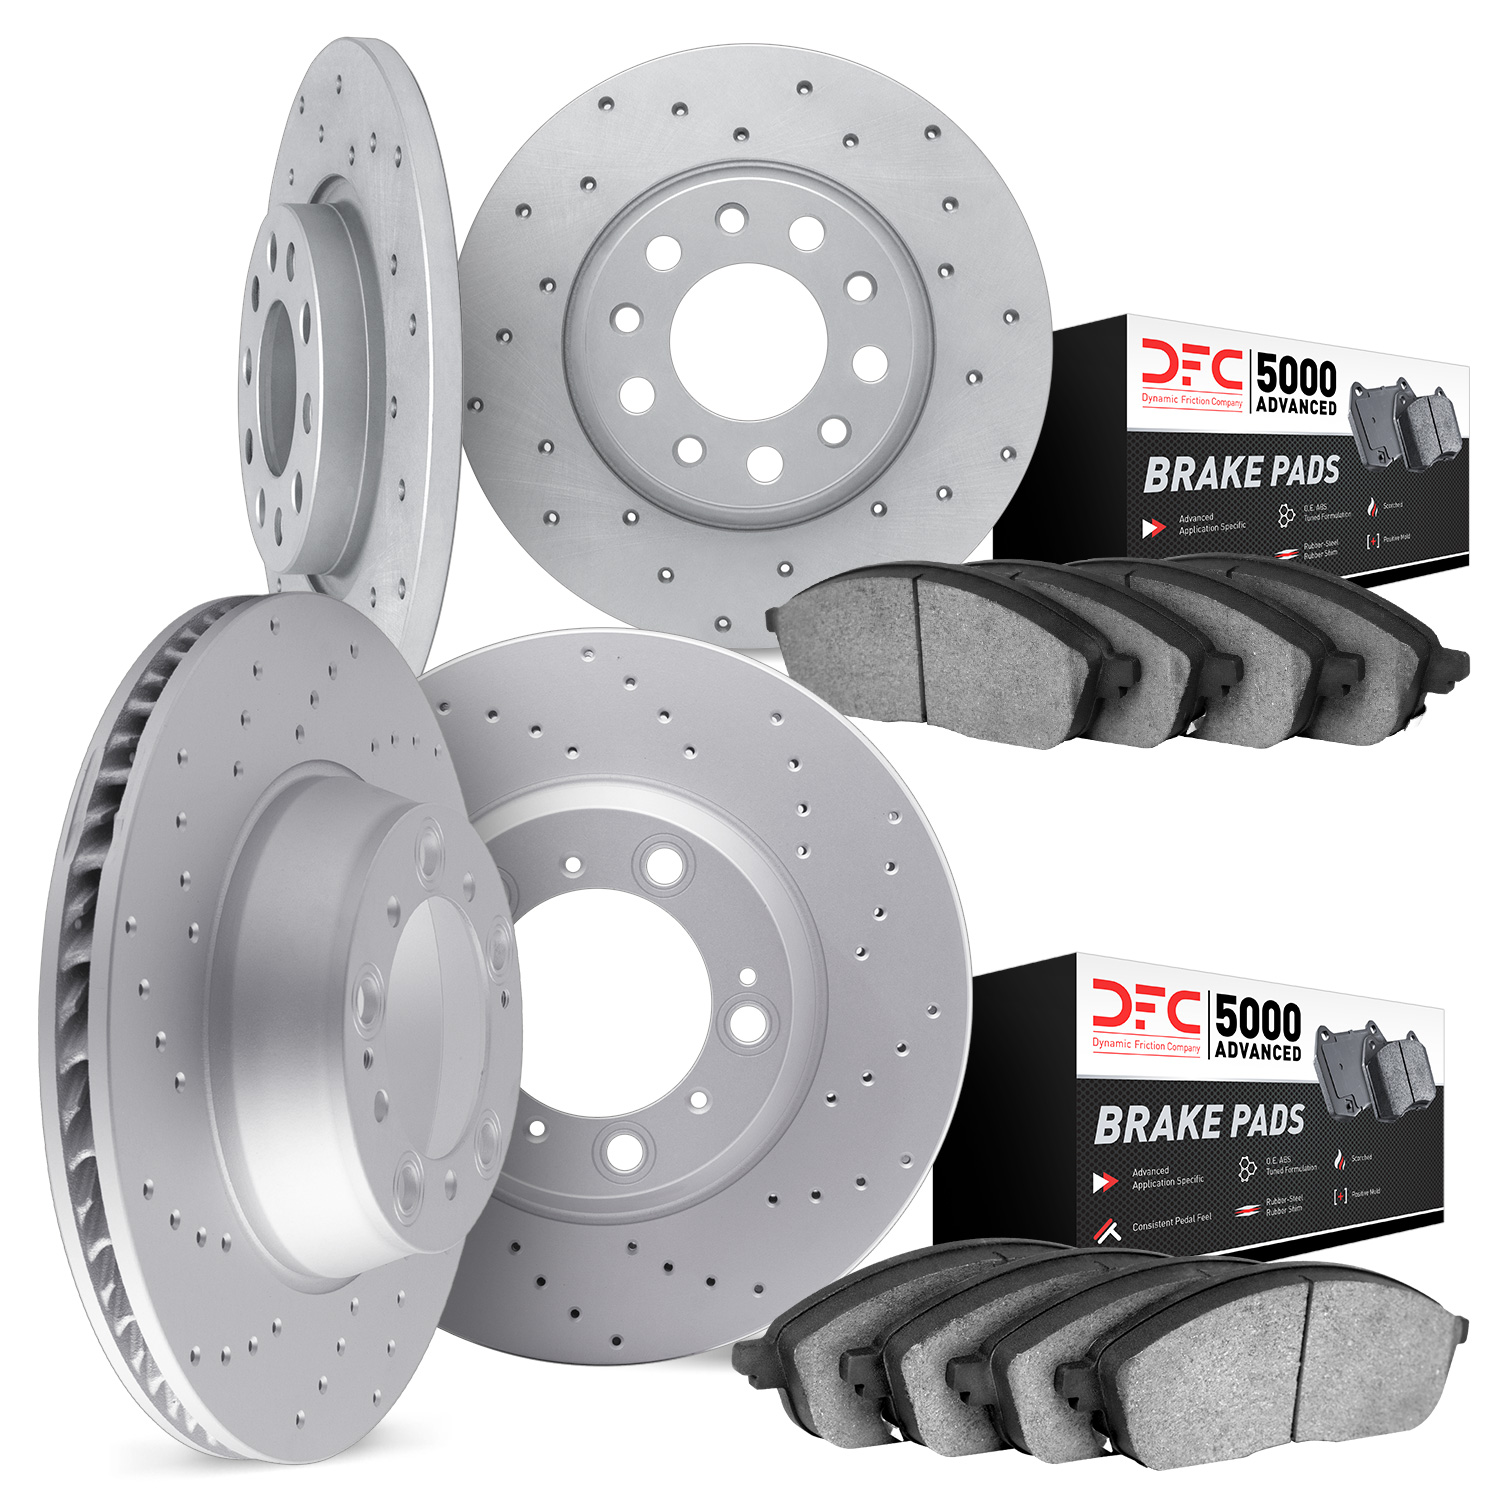 2704-01003 Geoperformance Drilled Brake Rotors with Active Performance Pads Kit, 2010-2013 Suzuki, Position: Front and Rear